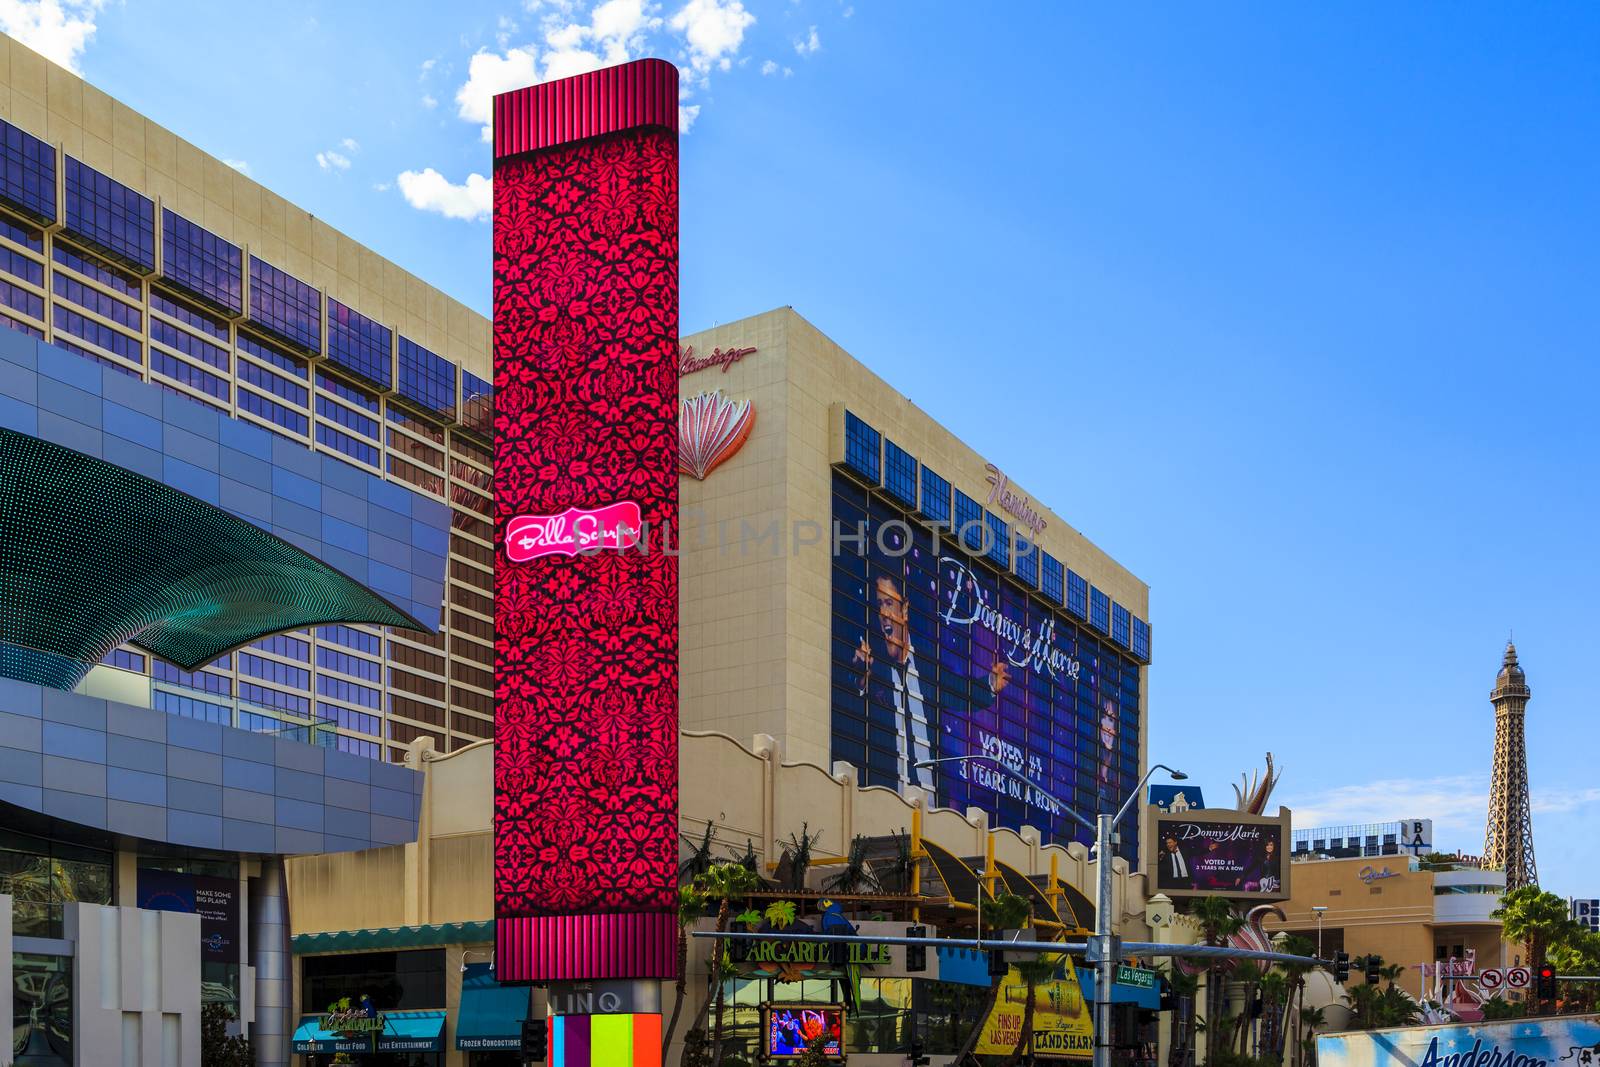 LAS VEGAS - JULY 7, 2015 -The LINQ Sign in Las Vegas. The LINQ is the open-air shopping and dining area leading up to The High Roller Wheel the world's largest observation wheel.